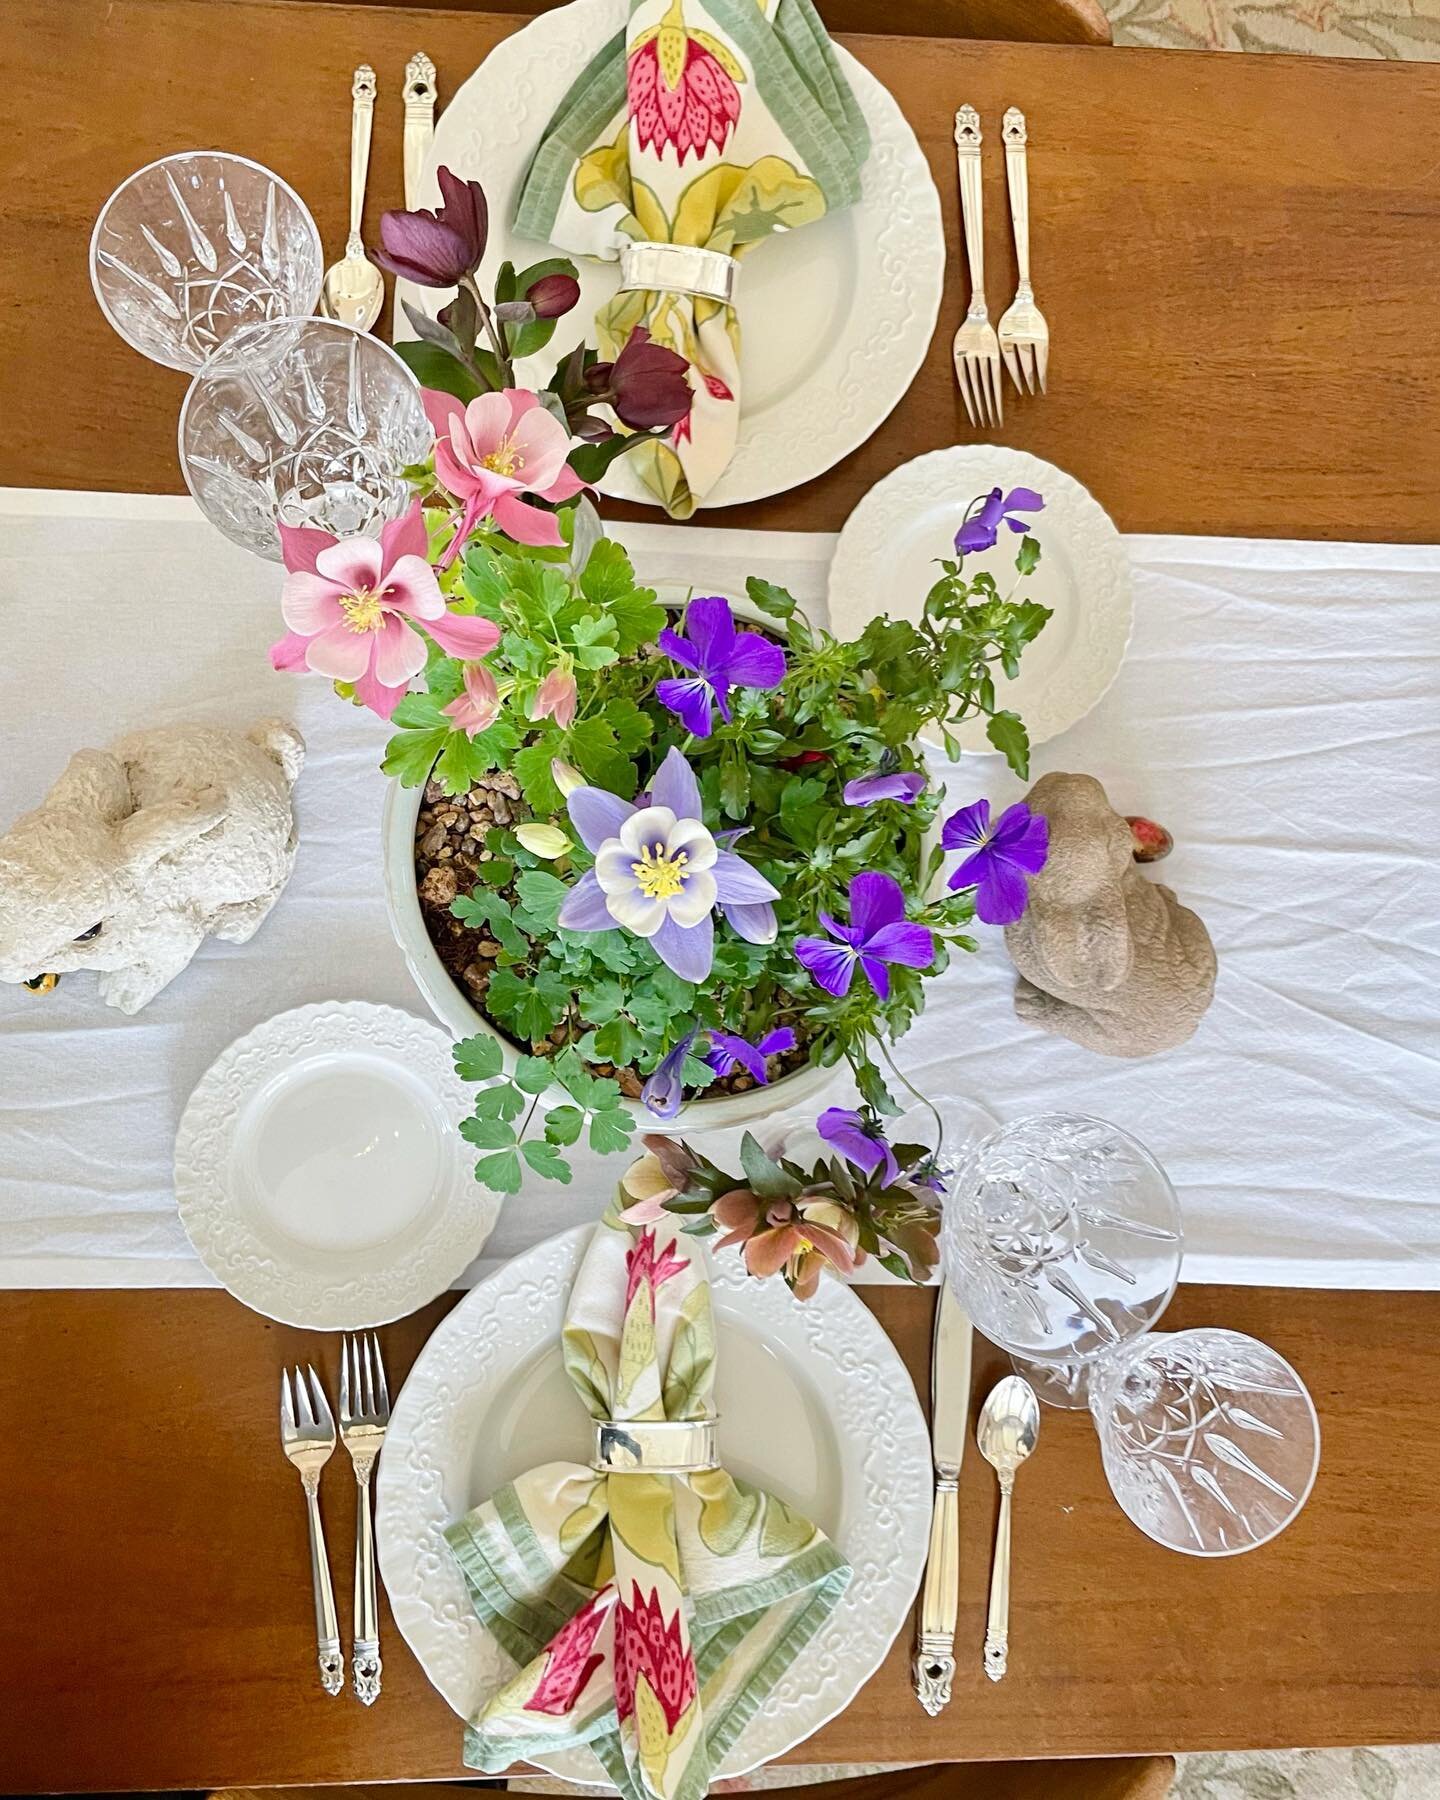 Save! If you are like me &mdash; not quite ready for Easter &mdash; here&rsquo;s a quick and festive table setting idea from last year. Pop over to your local garden center. I filled white pots with colorful blooms: two varieties of Aquilegia (aka Co